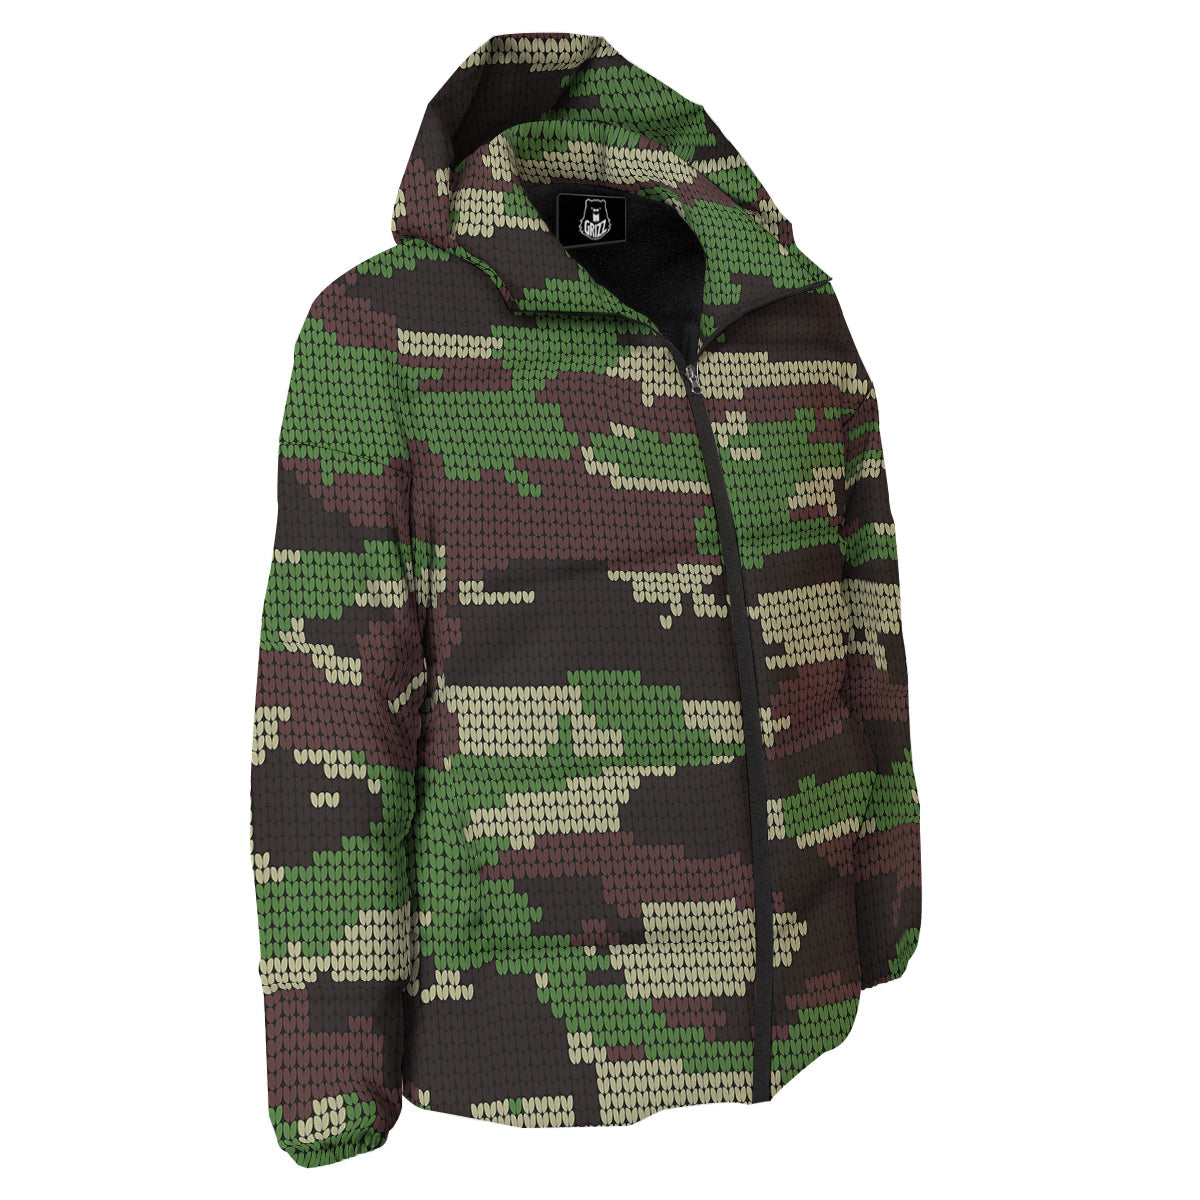 Knitted Army Camouflage Print Pattern Down Jacket